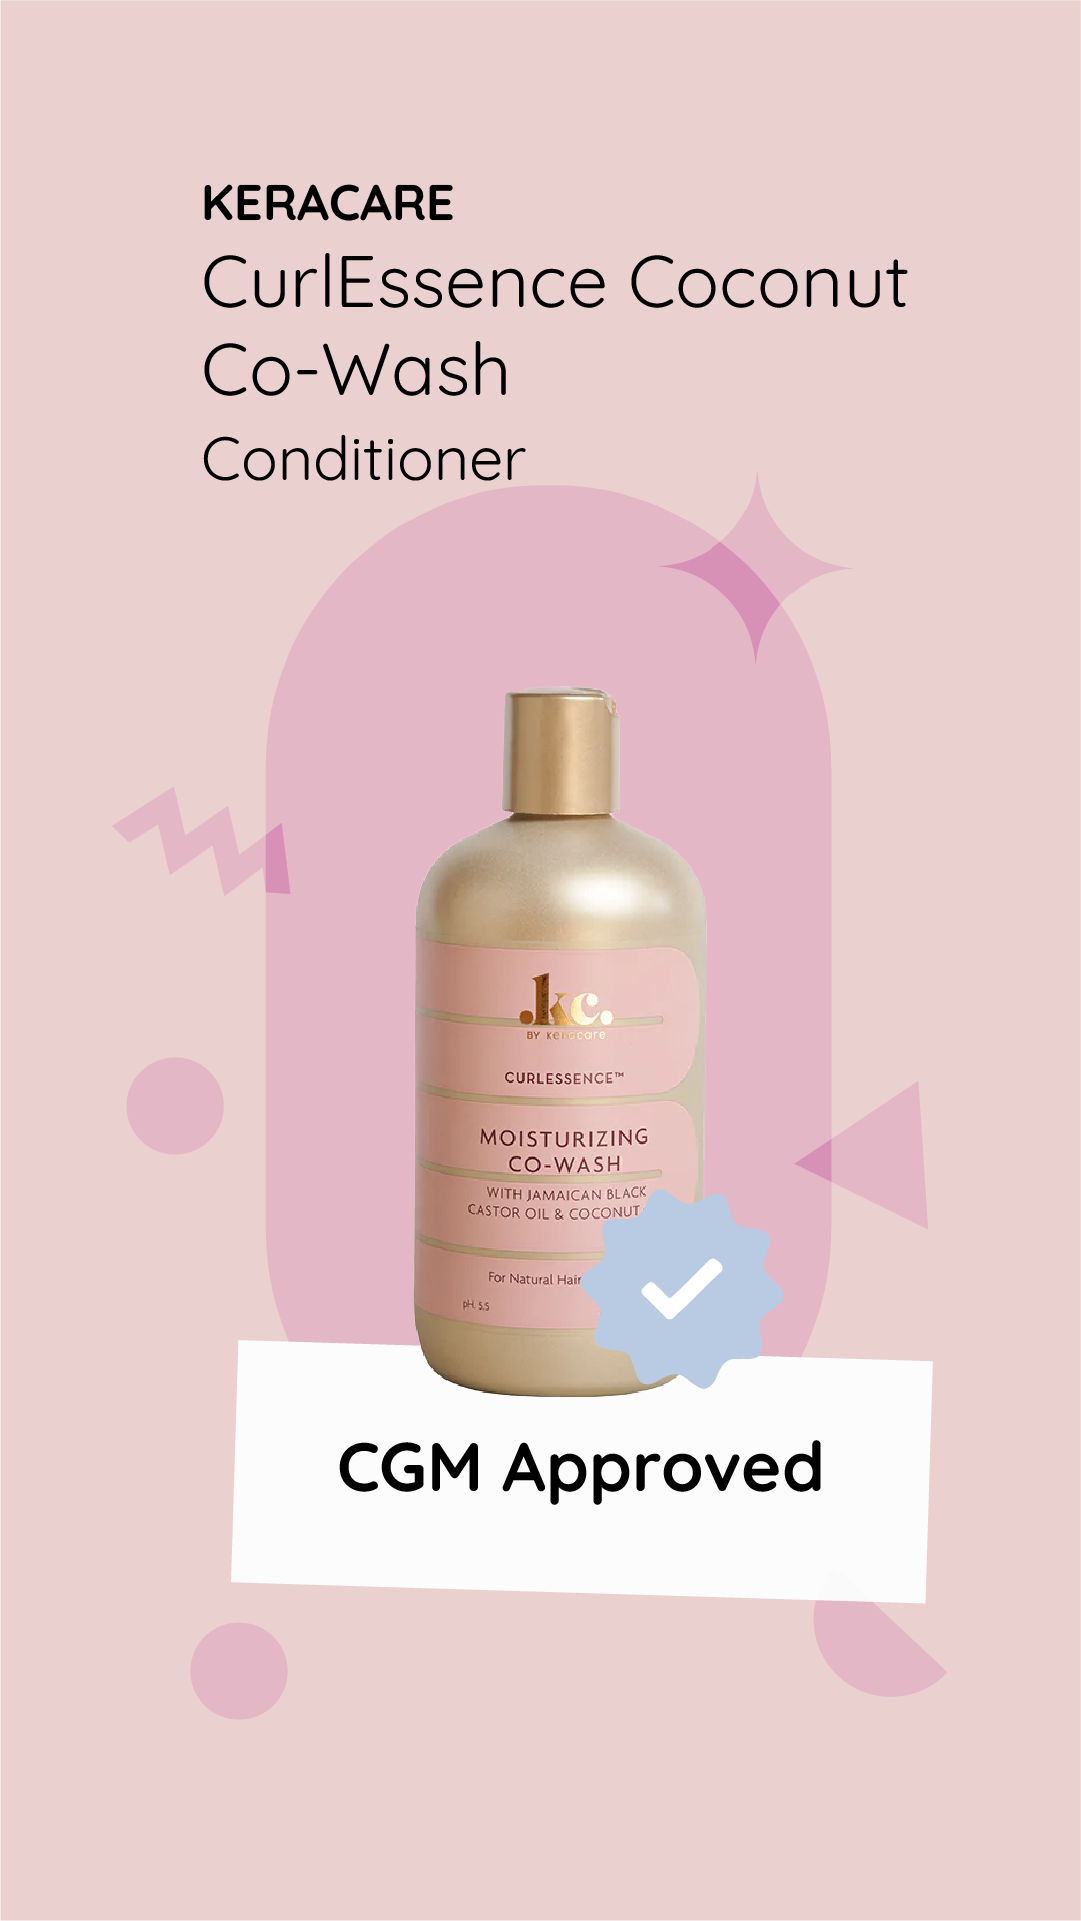 KeraCare Curlessence Co-Wash, CGM Approved?